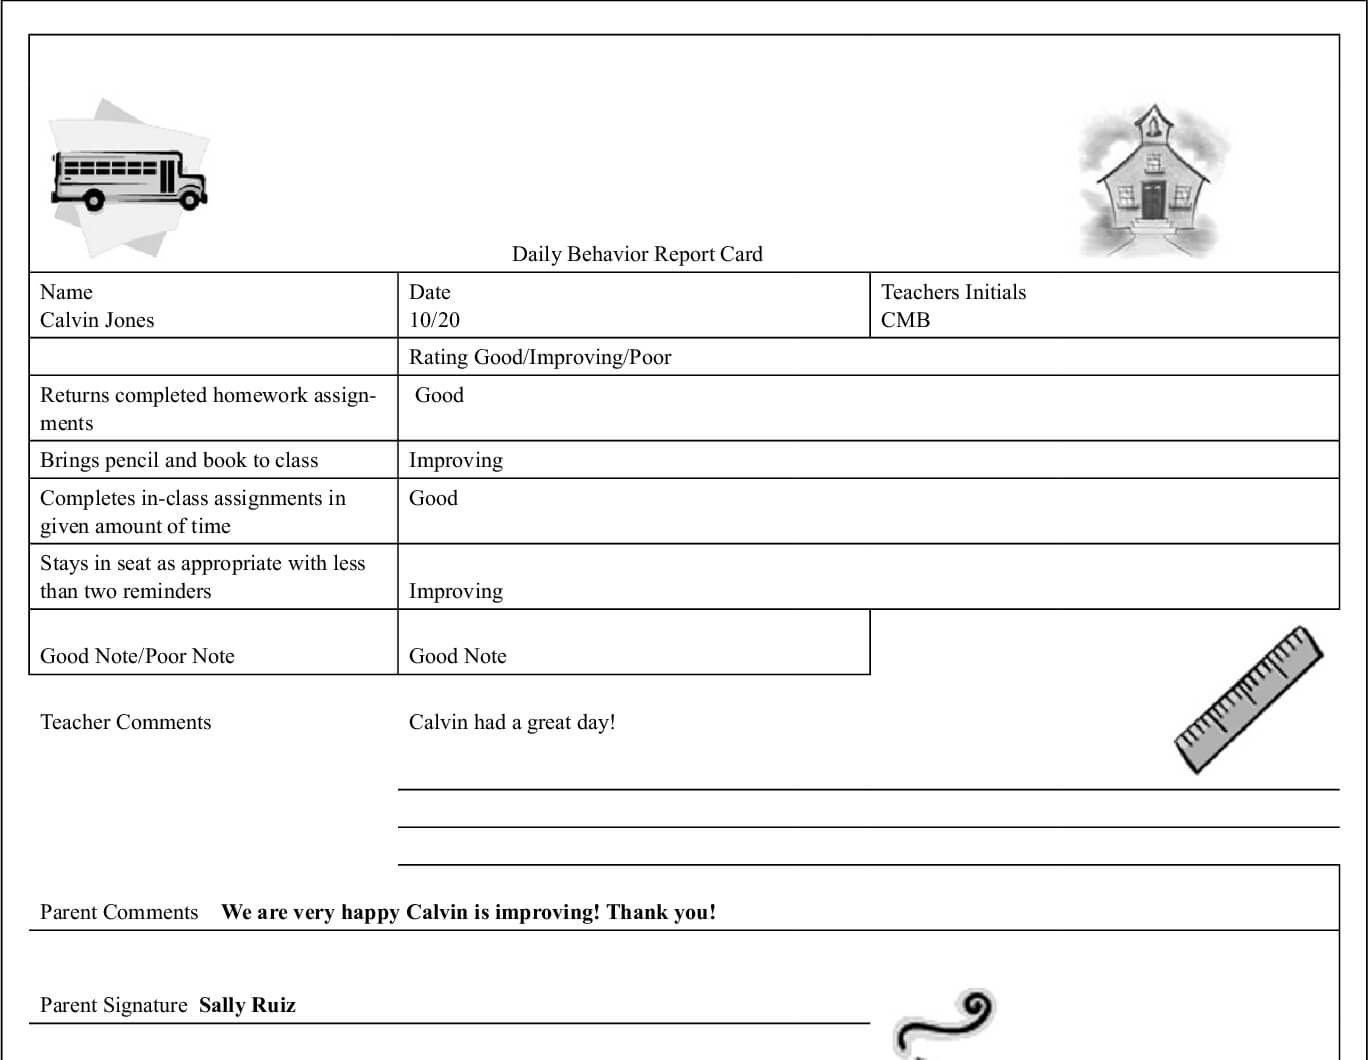 Pdf] Calvin Won't Sit Down! The Daily Behavior Report Card Intended For Daily Report Card Template For Adhd